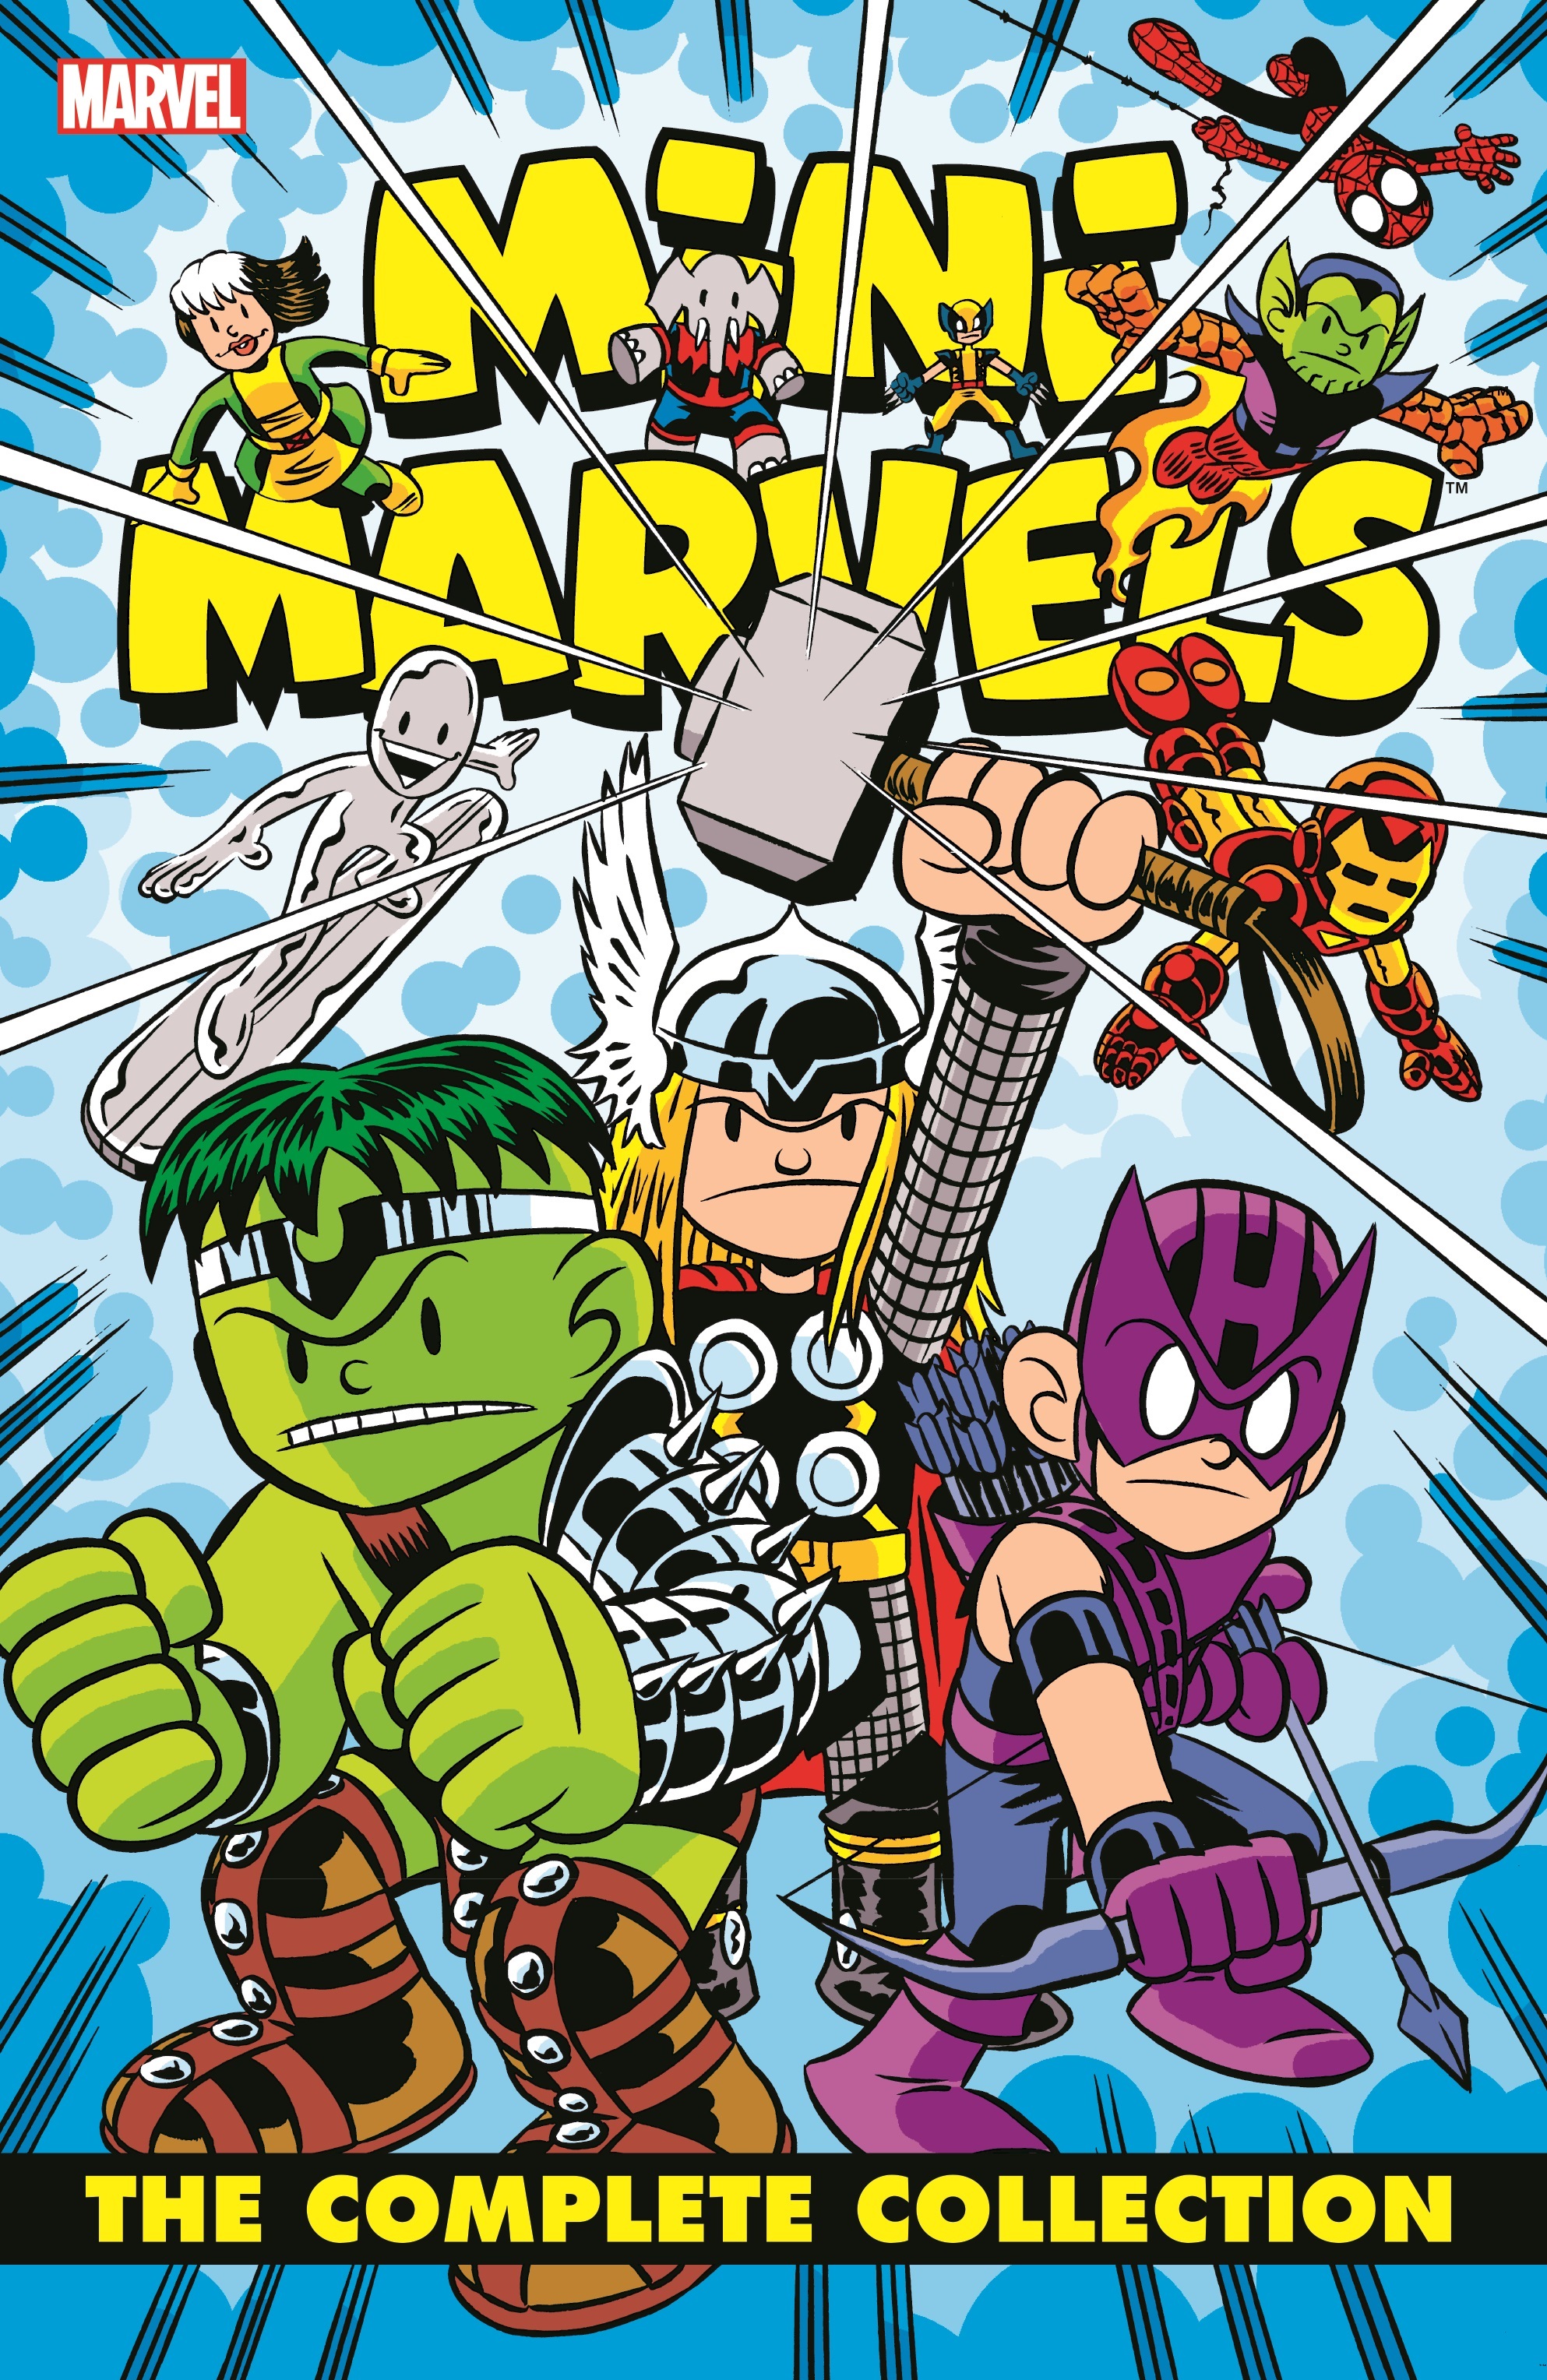 Mini Marvels: The Complete Collection (Trade Paperback)